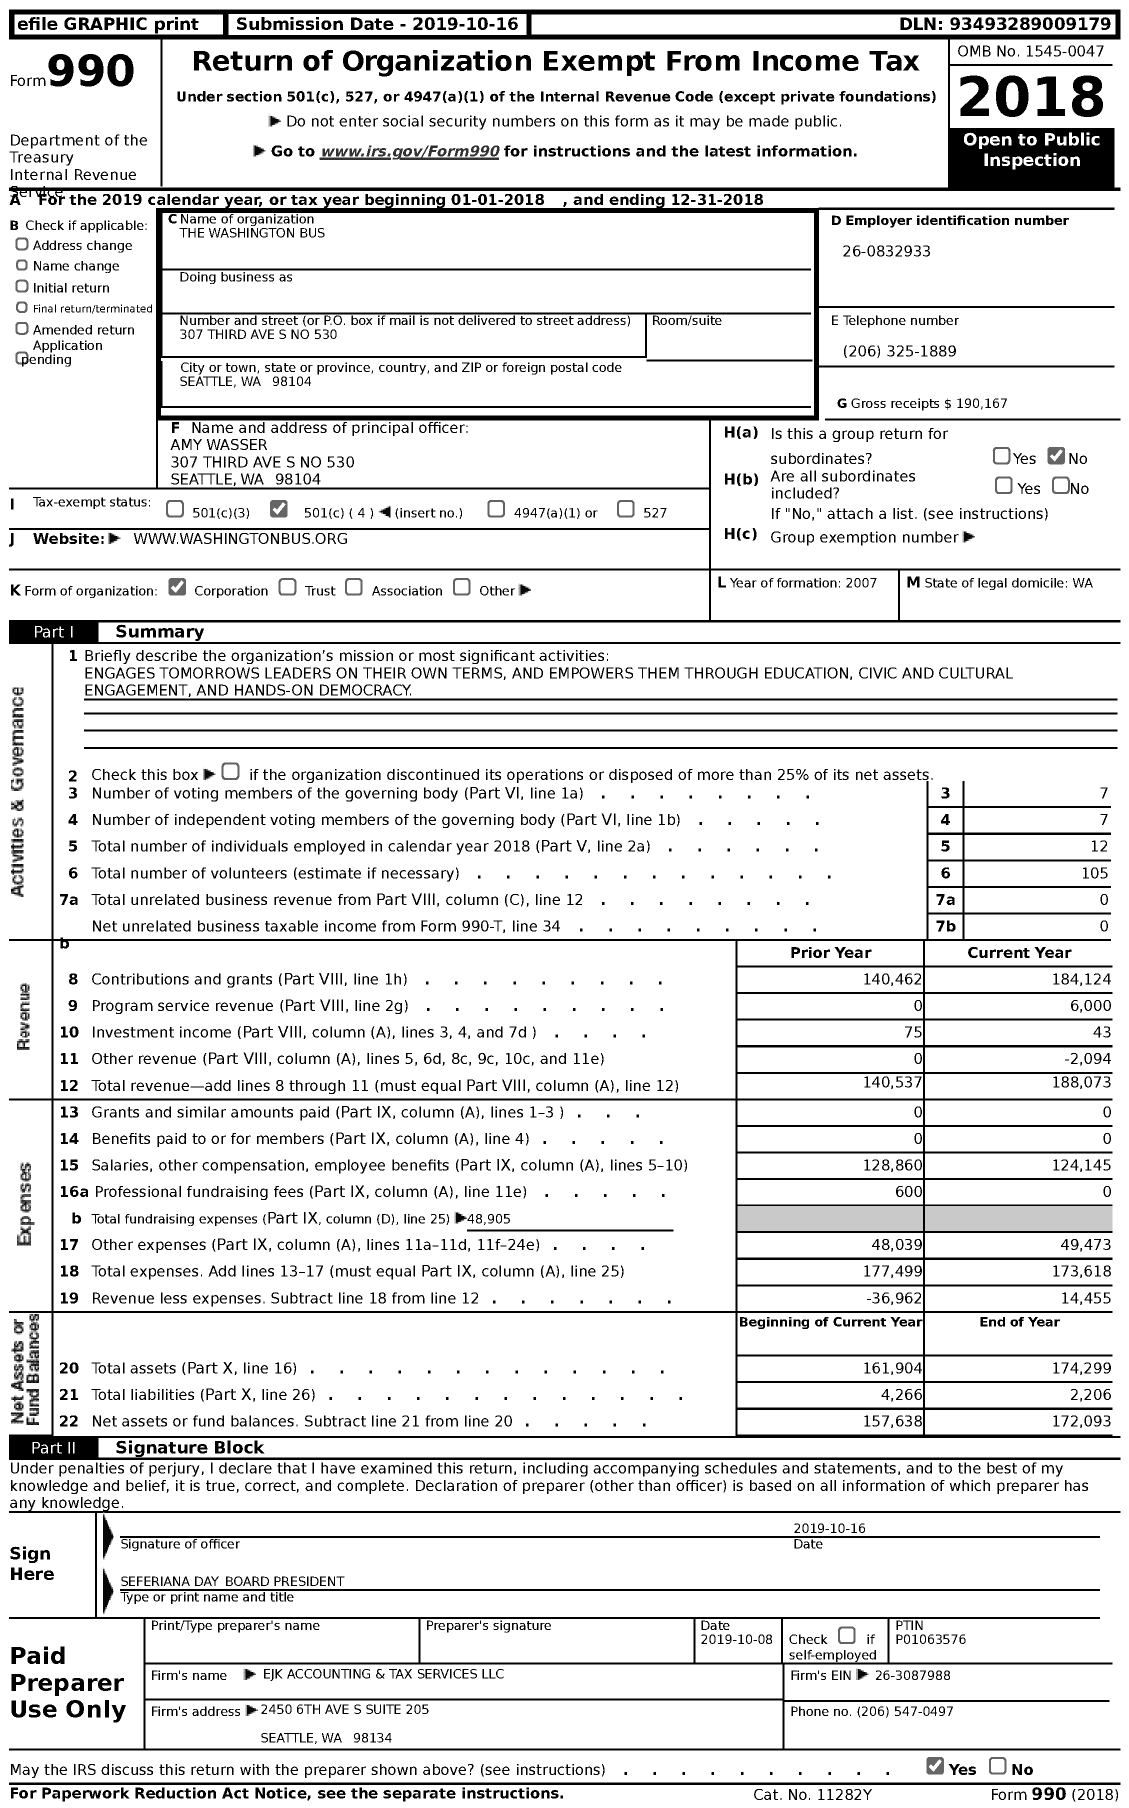 Image of first page of 2018 Form 990 for The Washington Bus